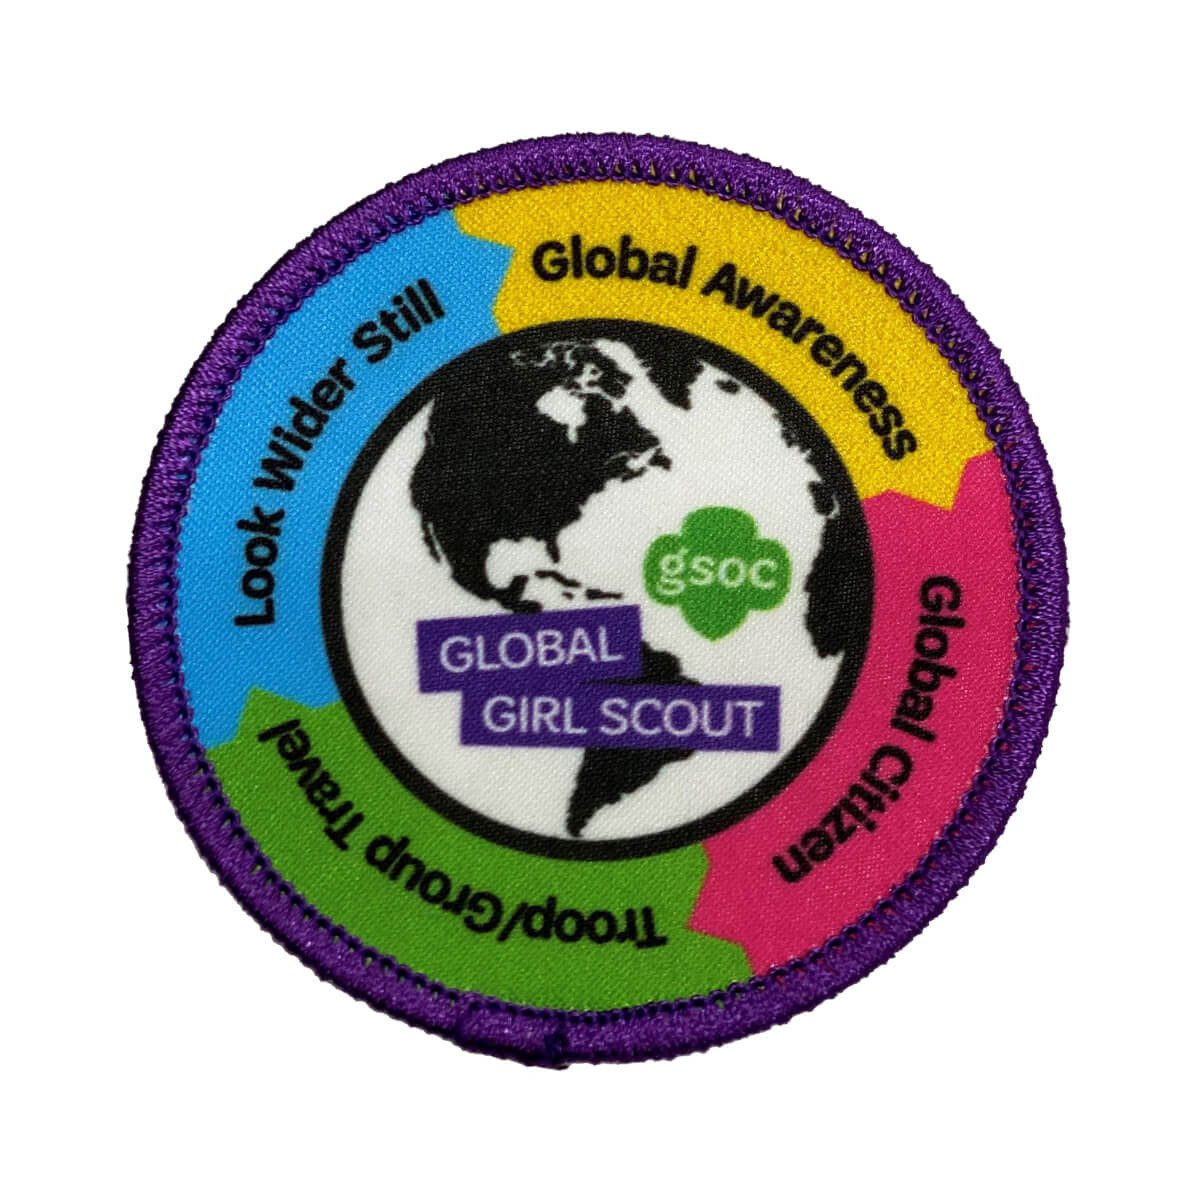 GSOC Global Girl Scout Patch